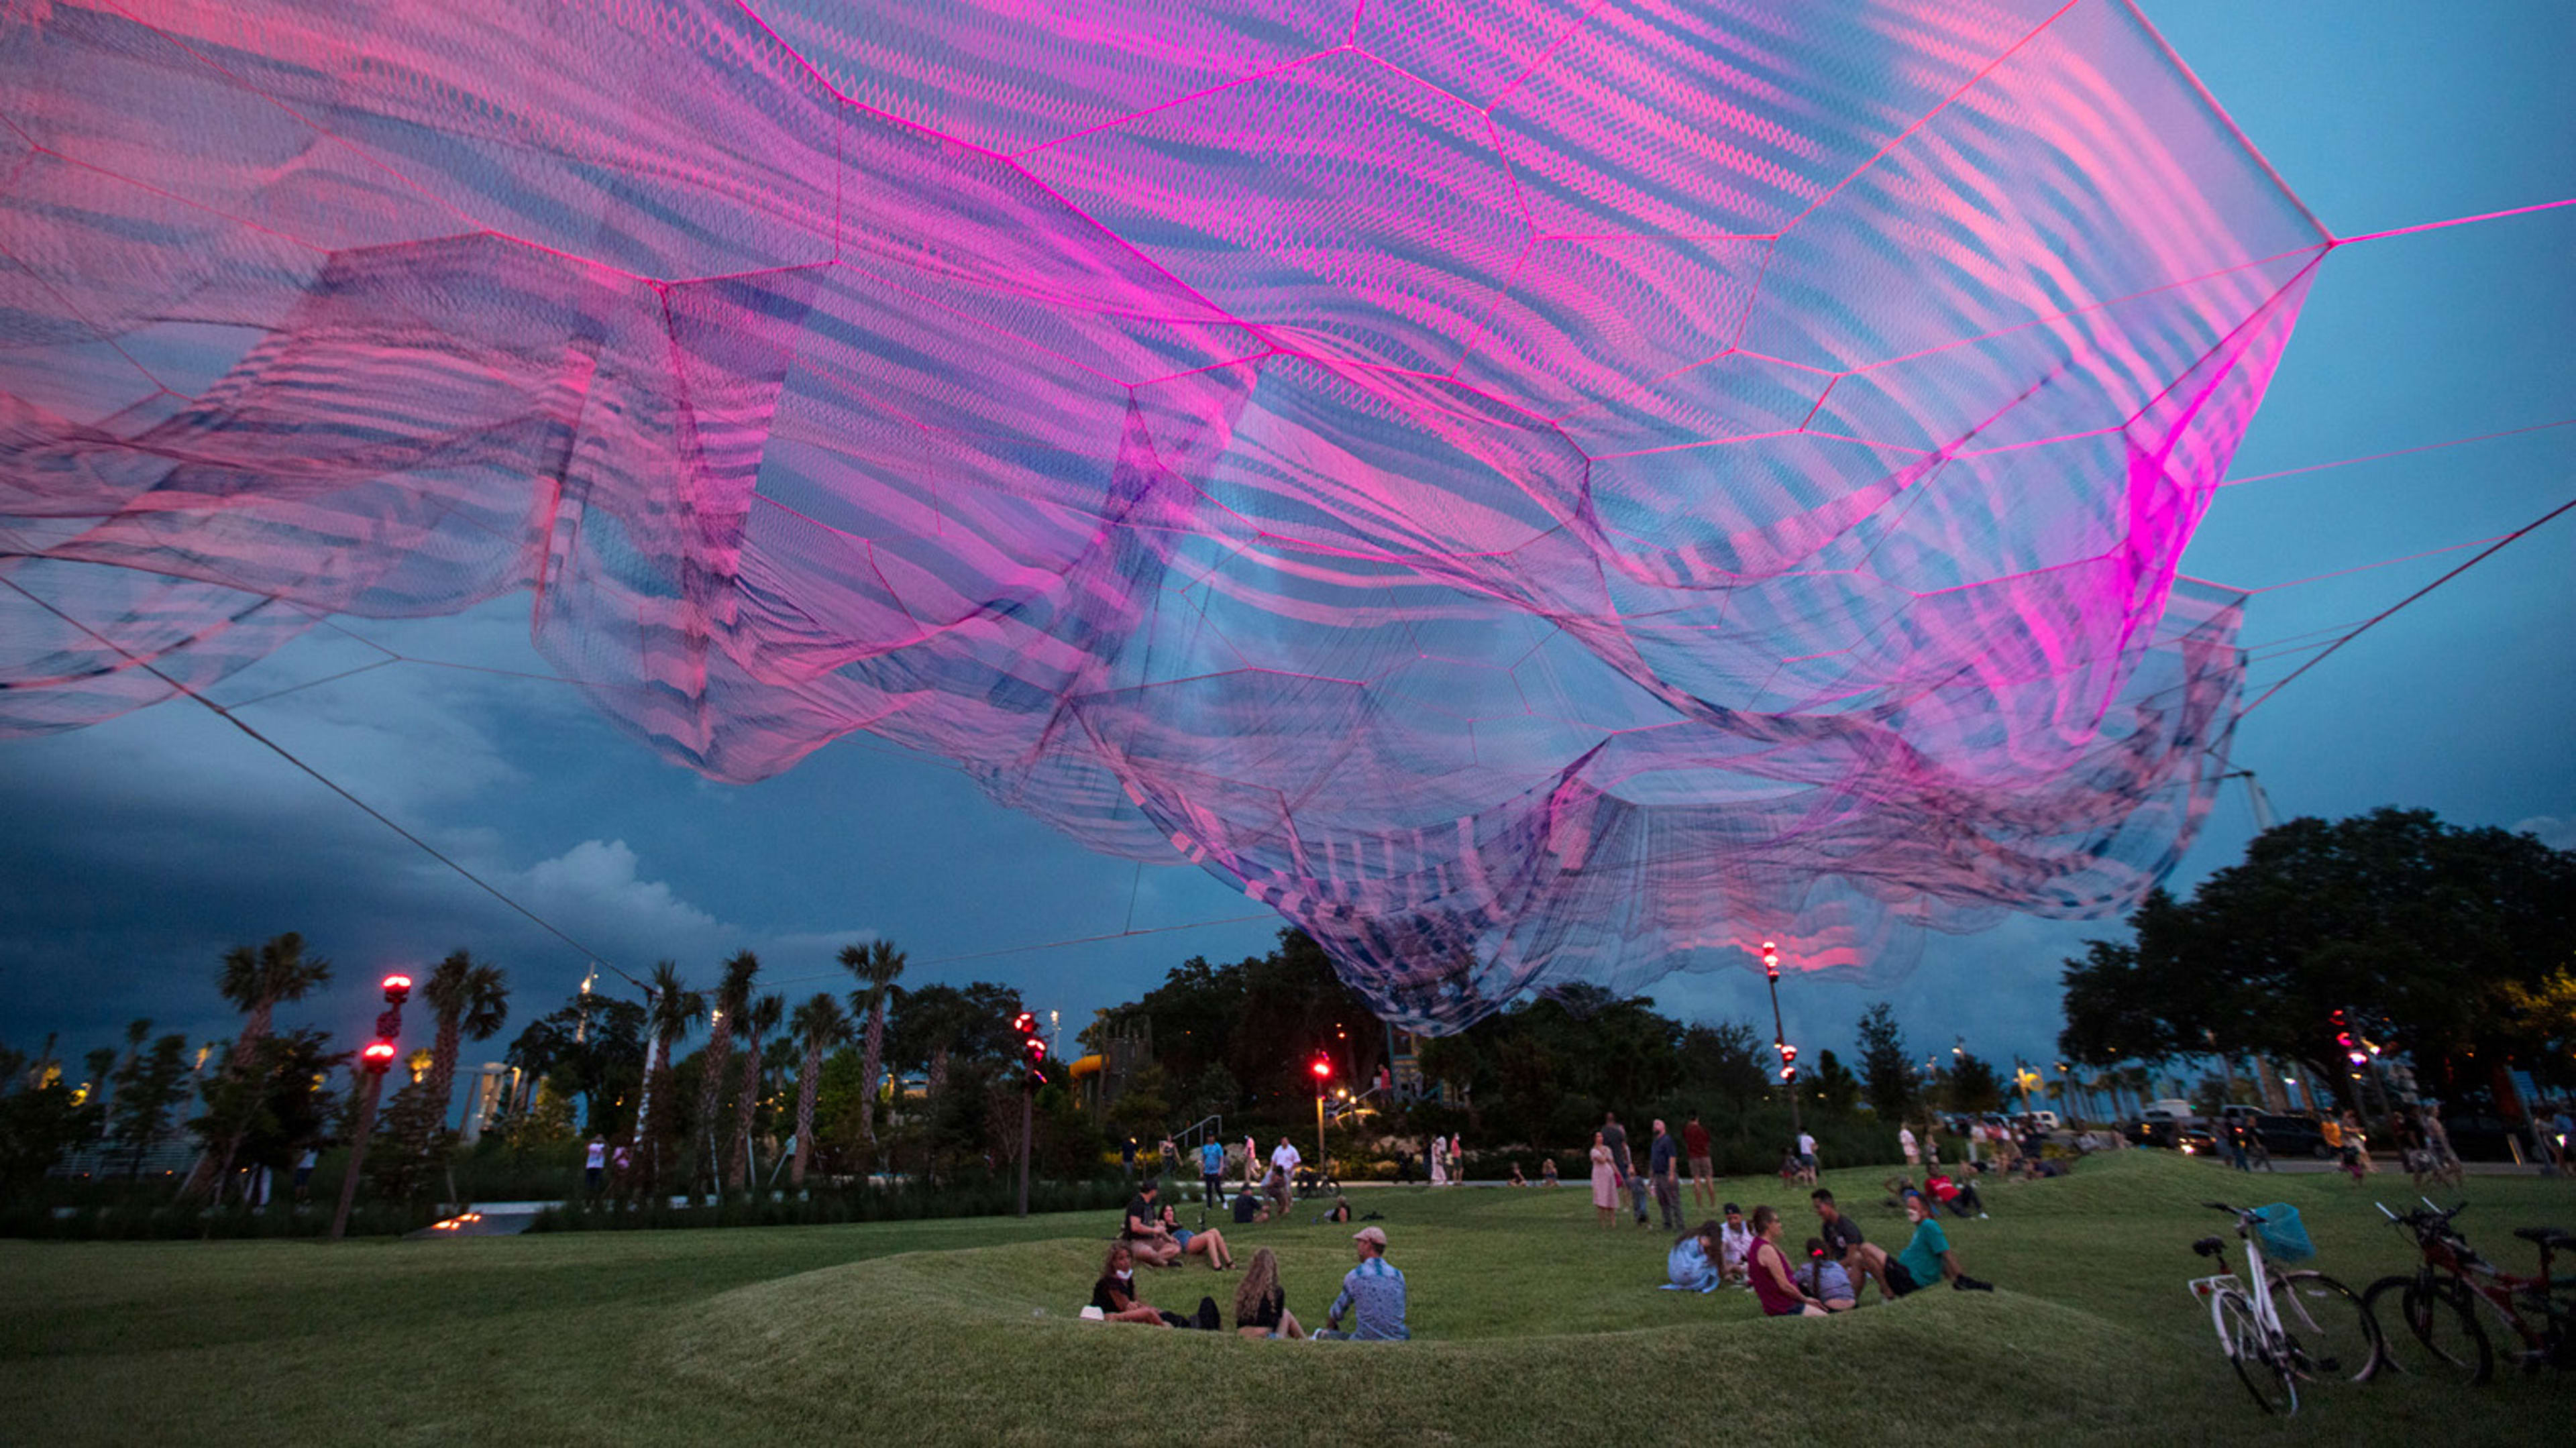 This new aerial sculpture in Florida is gorgeous. It’s also a haunting reminder of an ugly past